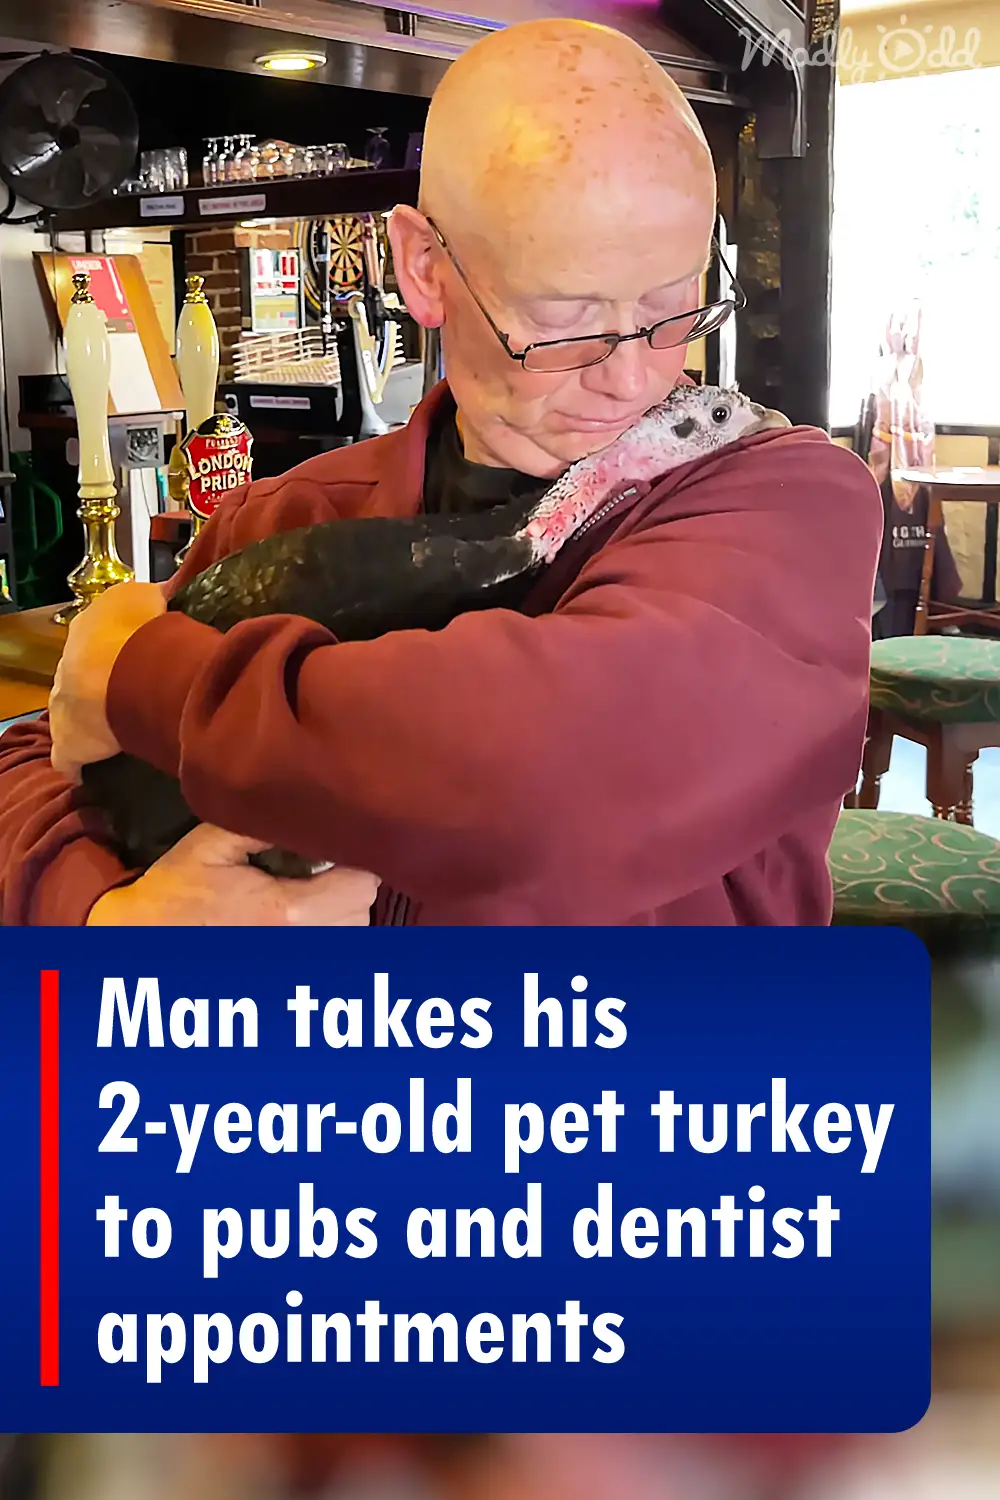 Man takes his 2-year-old pet turkey to pubs and dentist appointments